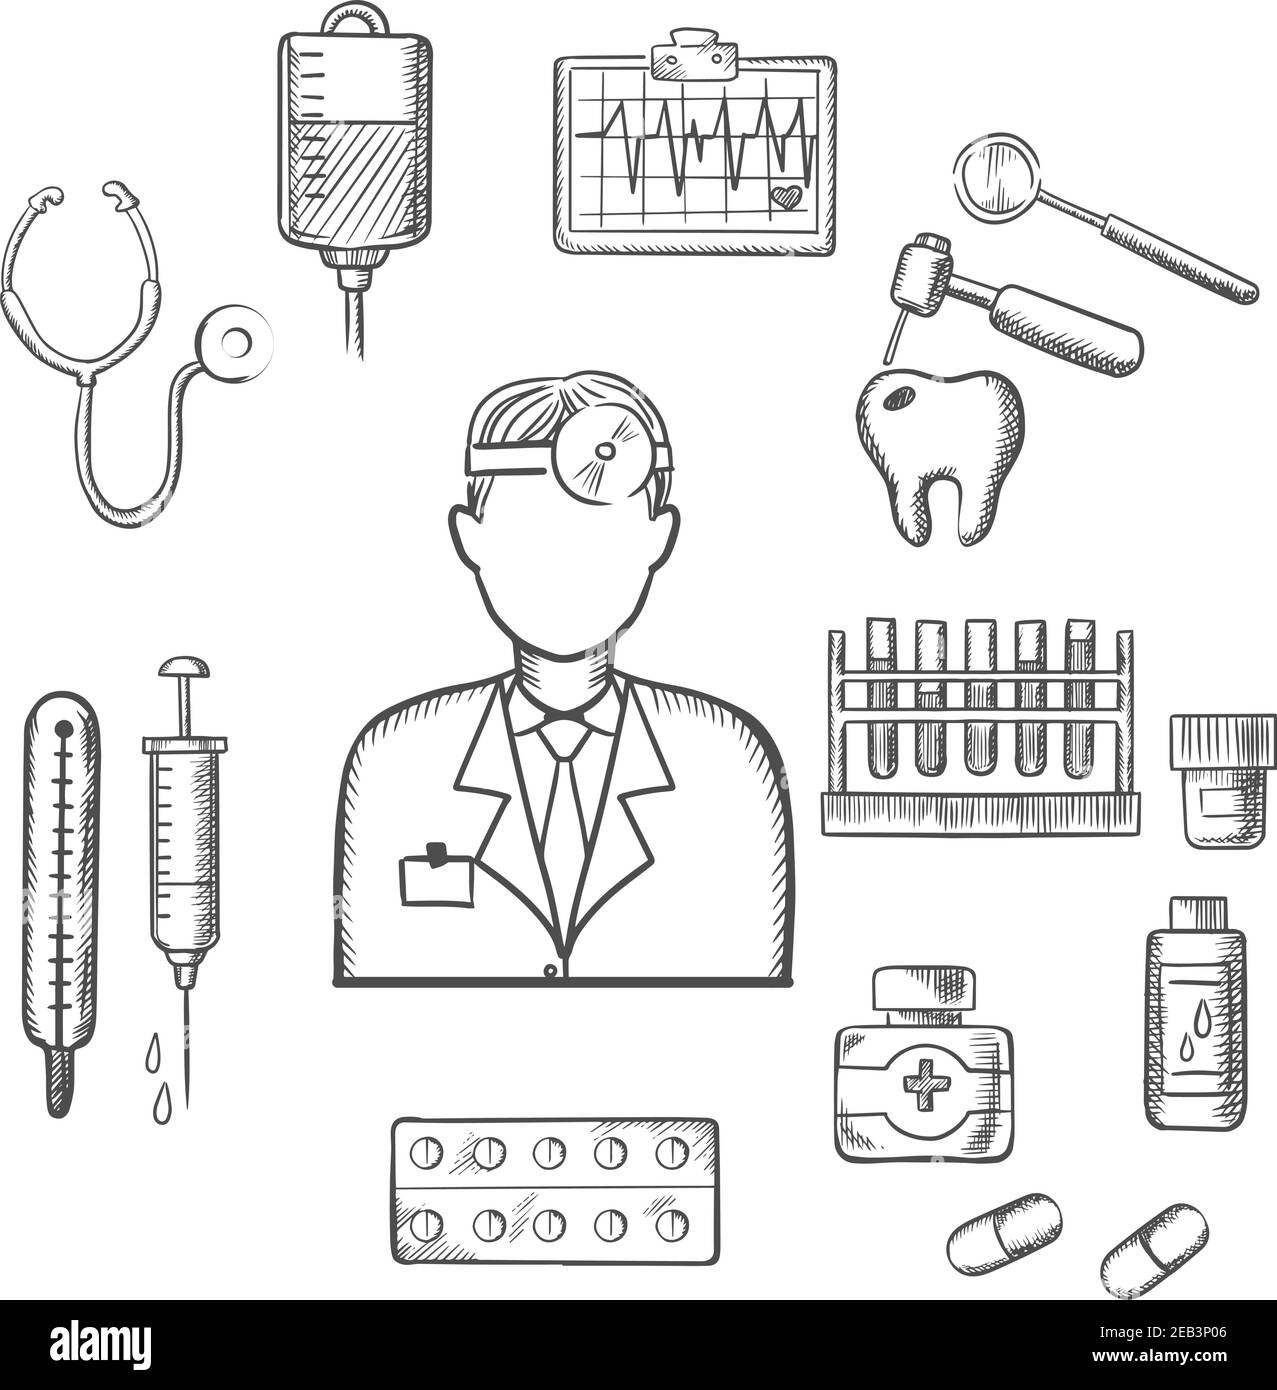 Doctor therapist in sketch style with medical icons as tubes, flasks, drugs and pills, syringe, dentistry, blood transfusion, ultrasound stethoscope. Stock Vector